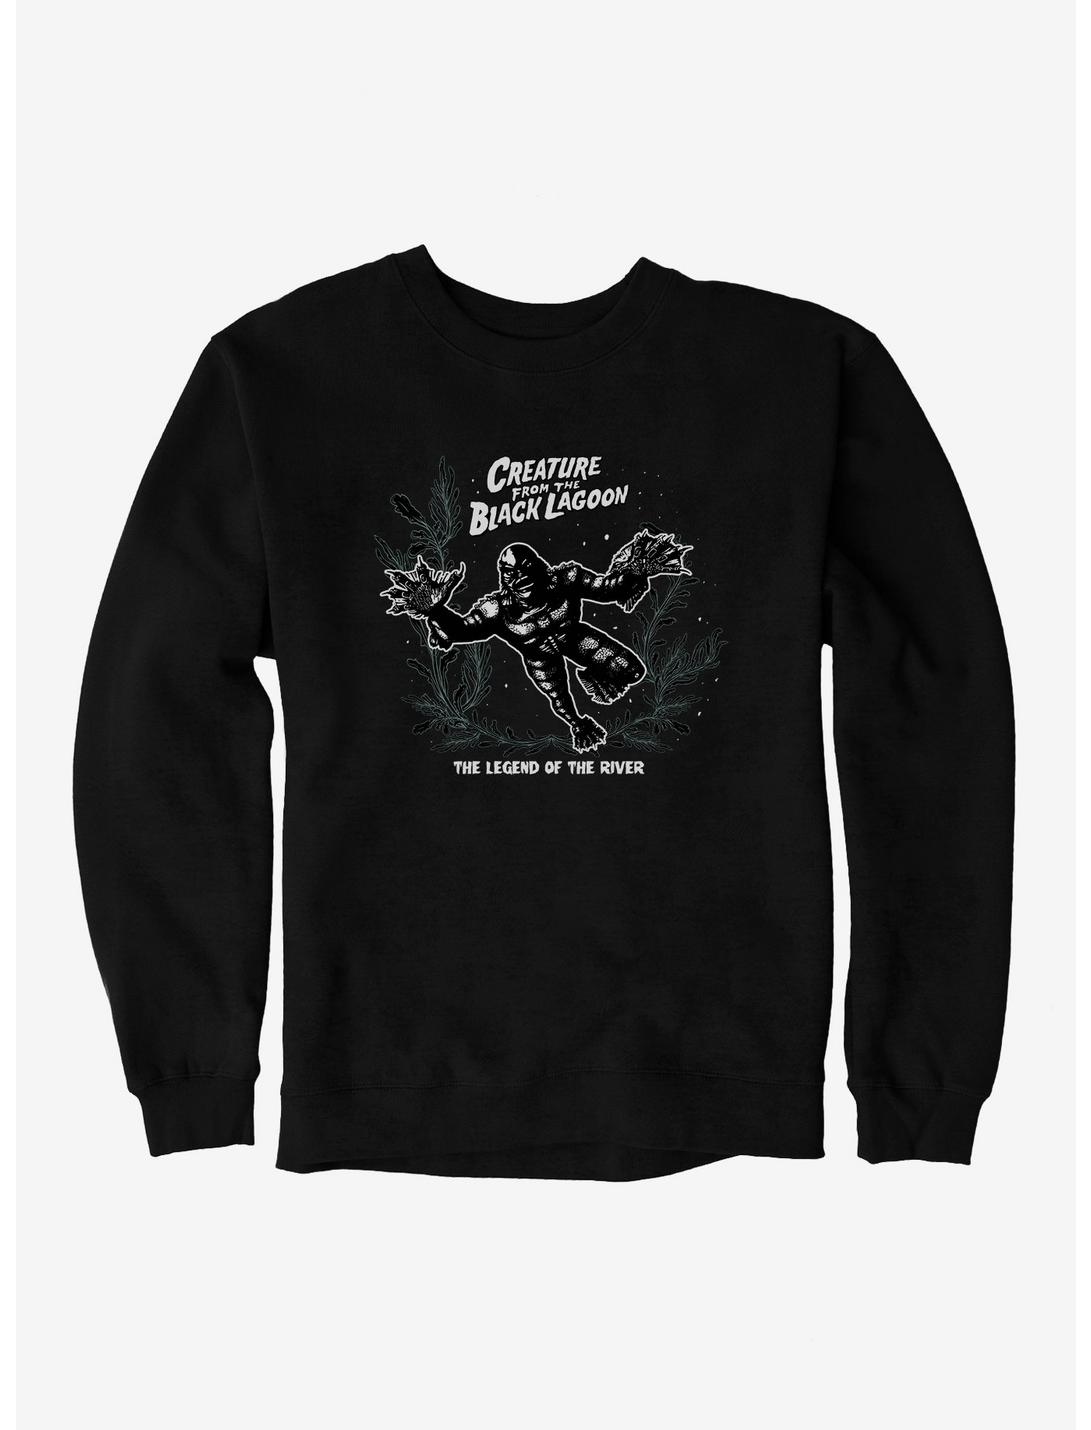 Creature From The Black Lagoon Legend Of The River Sweatshirt, BLACK, hi-res